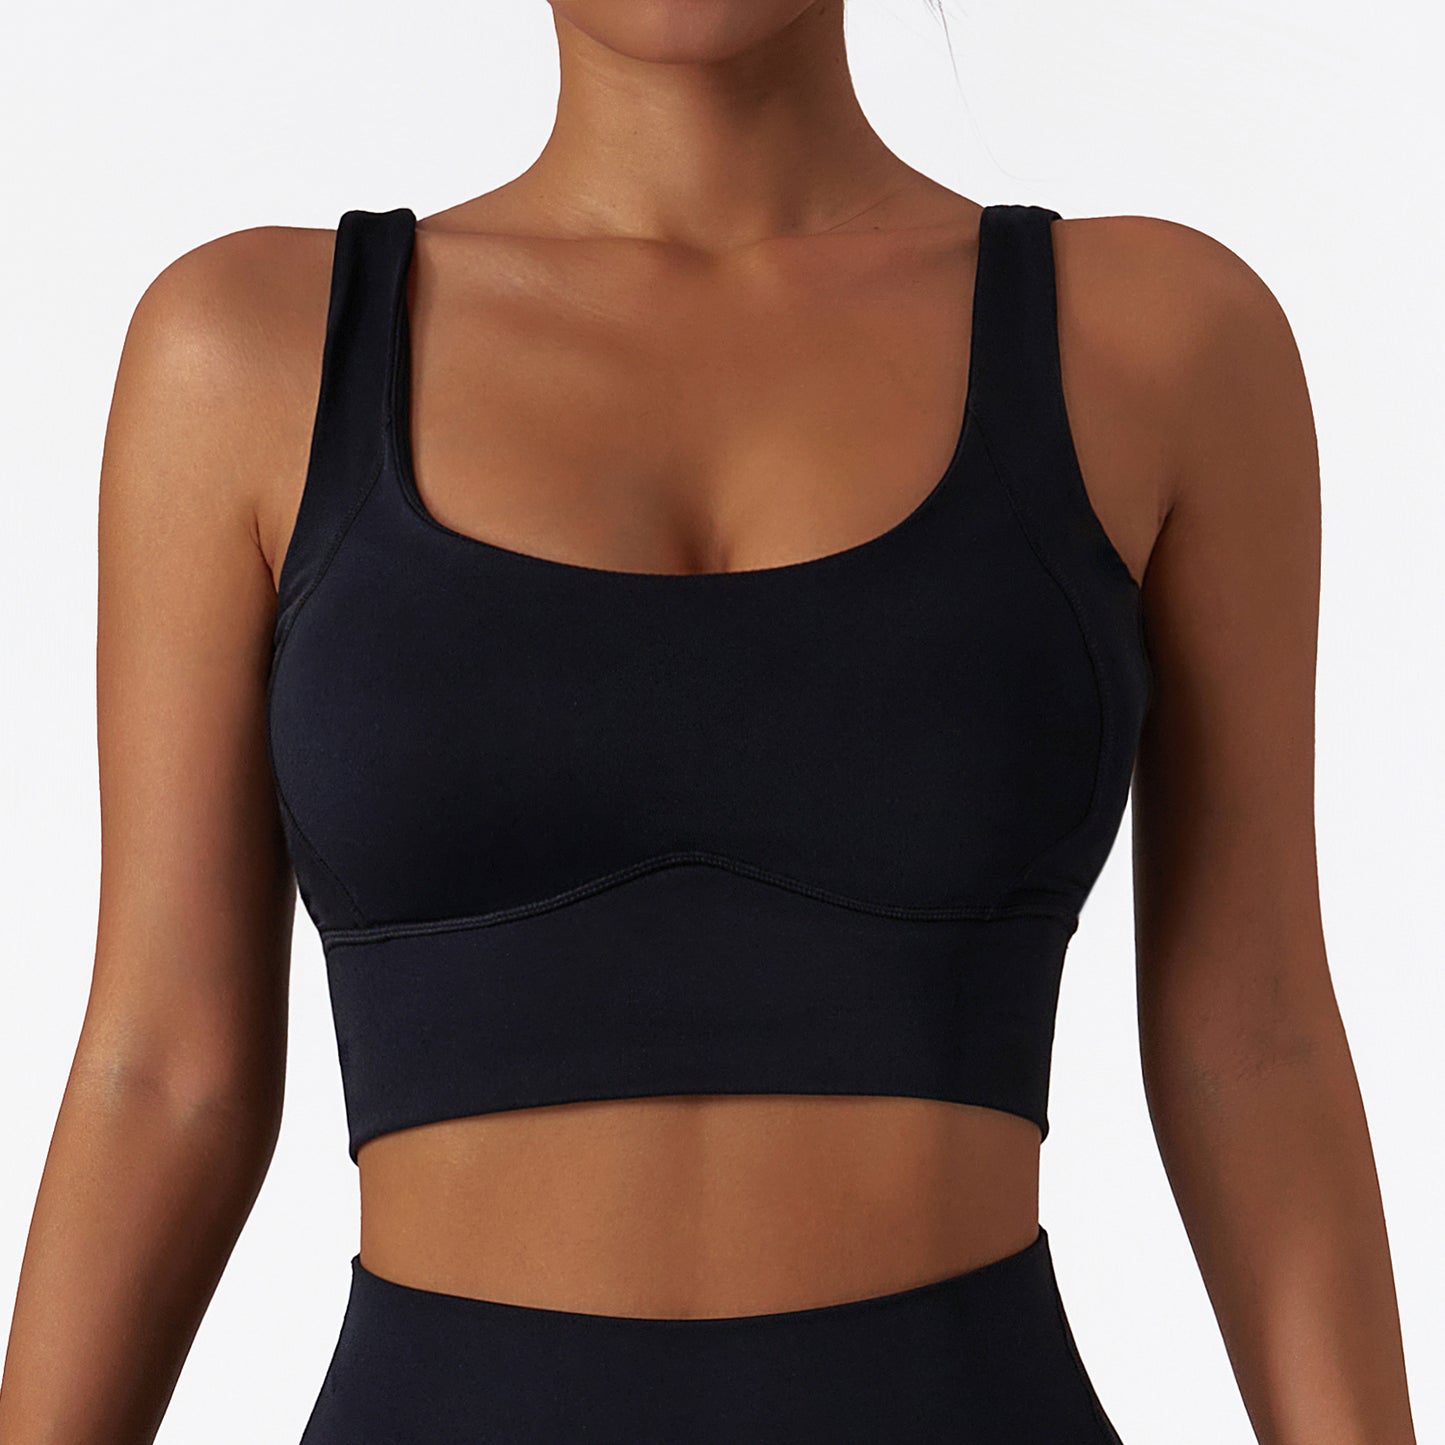 Women Elastic Square Neck Sports Bras Super Soft V Cut Hem Gym Yoga Tank Tops. This super comfortable bra is made from nylon and spandex breathable materials that are durable, quick-dry and have great stretchable abilities giving you a comfortable and flexible feel. Its suitable for jogging, yoga, gym and is comfortable for leisure wear.